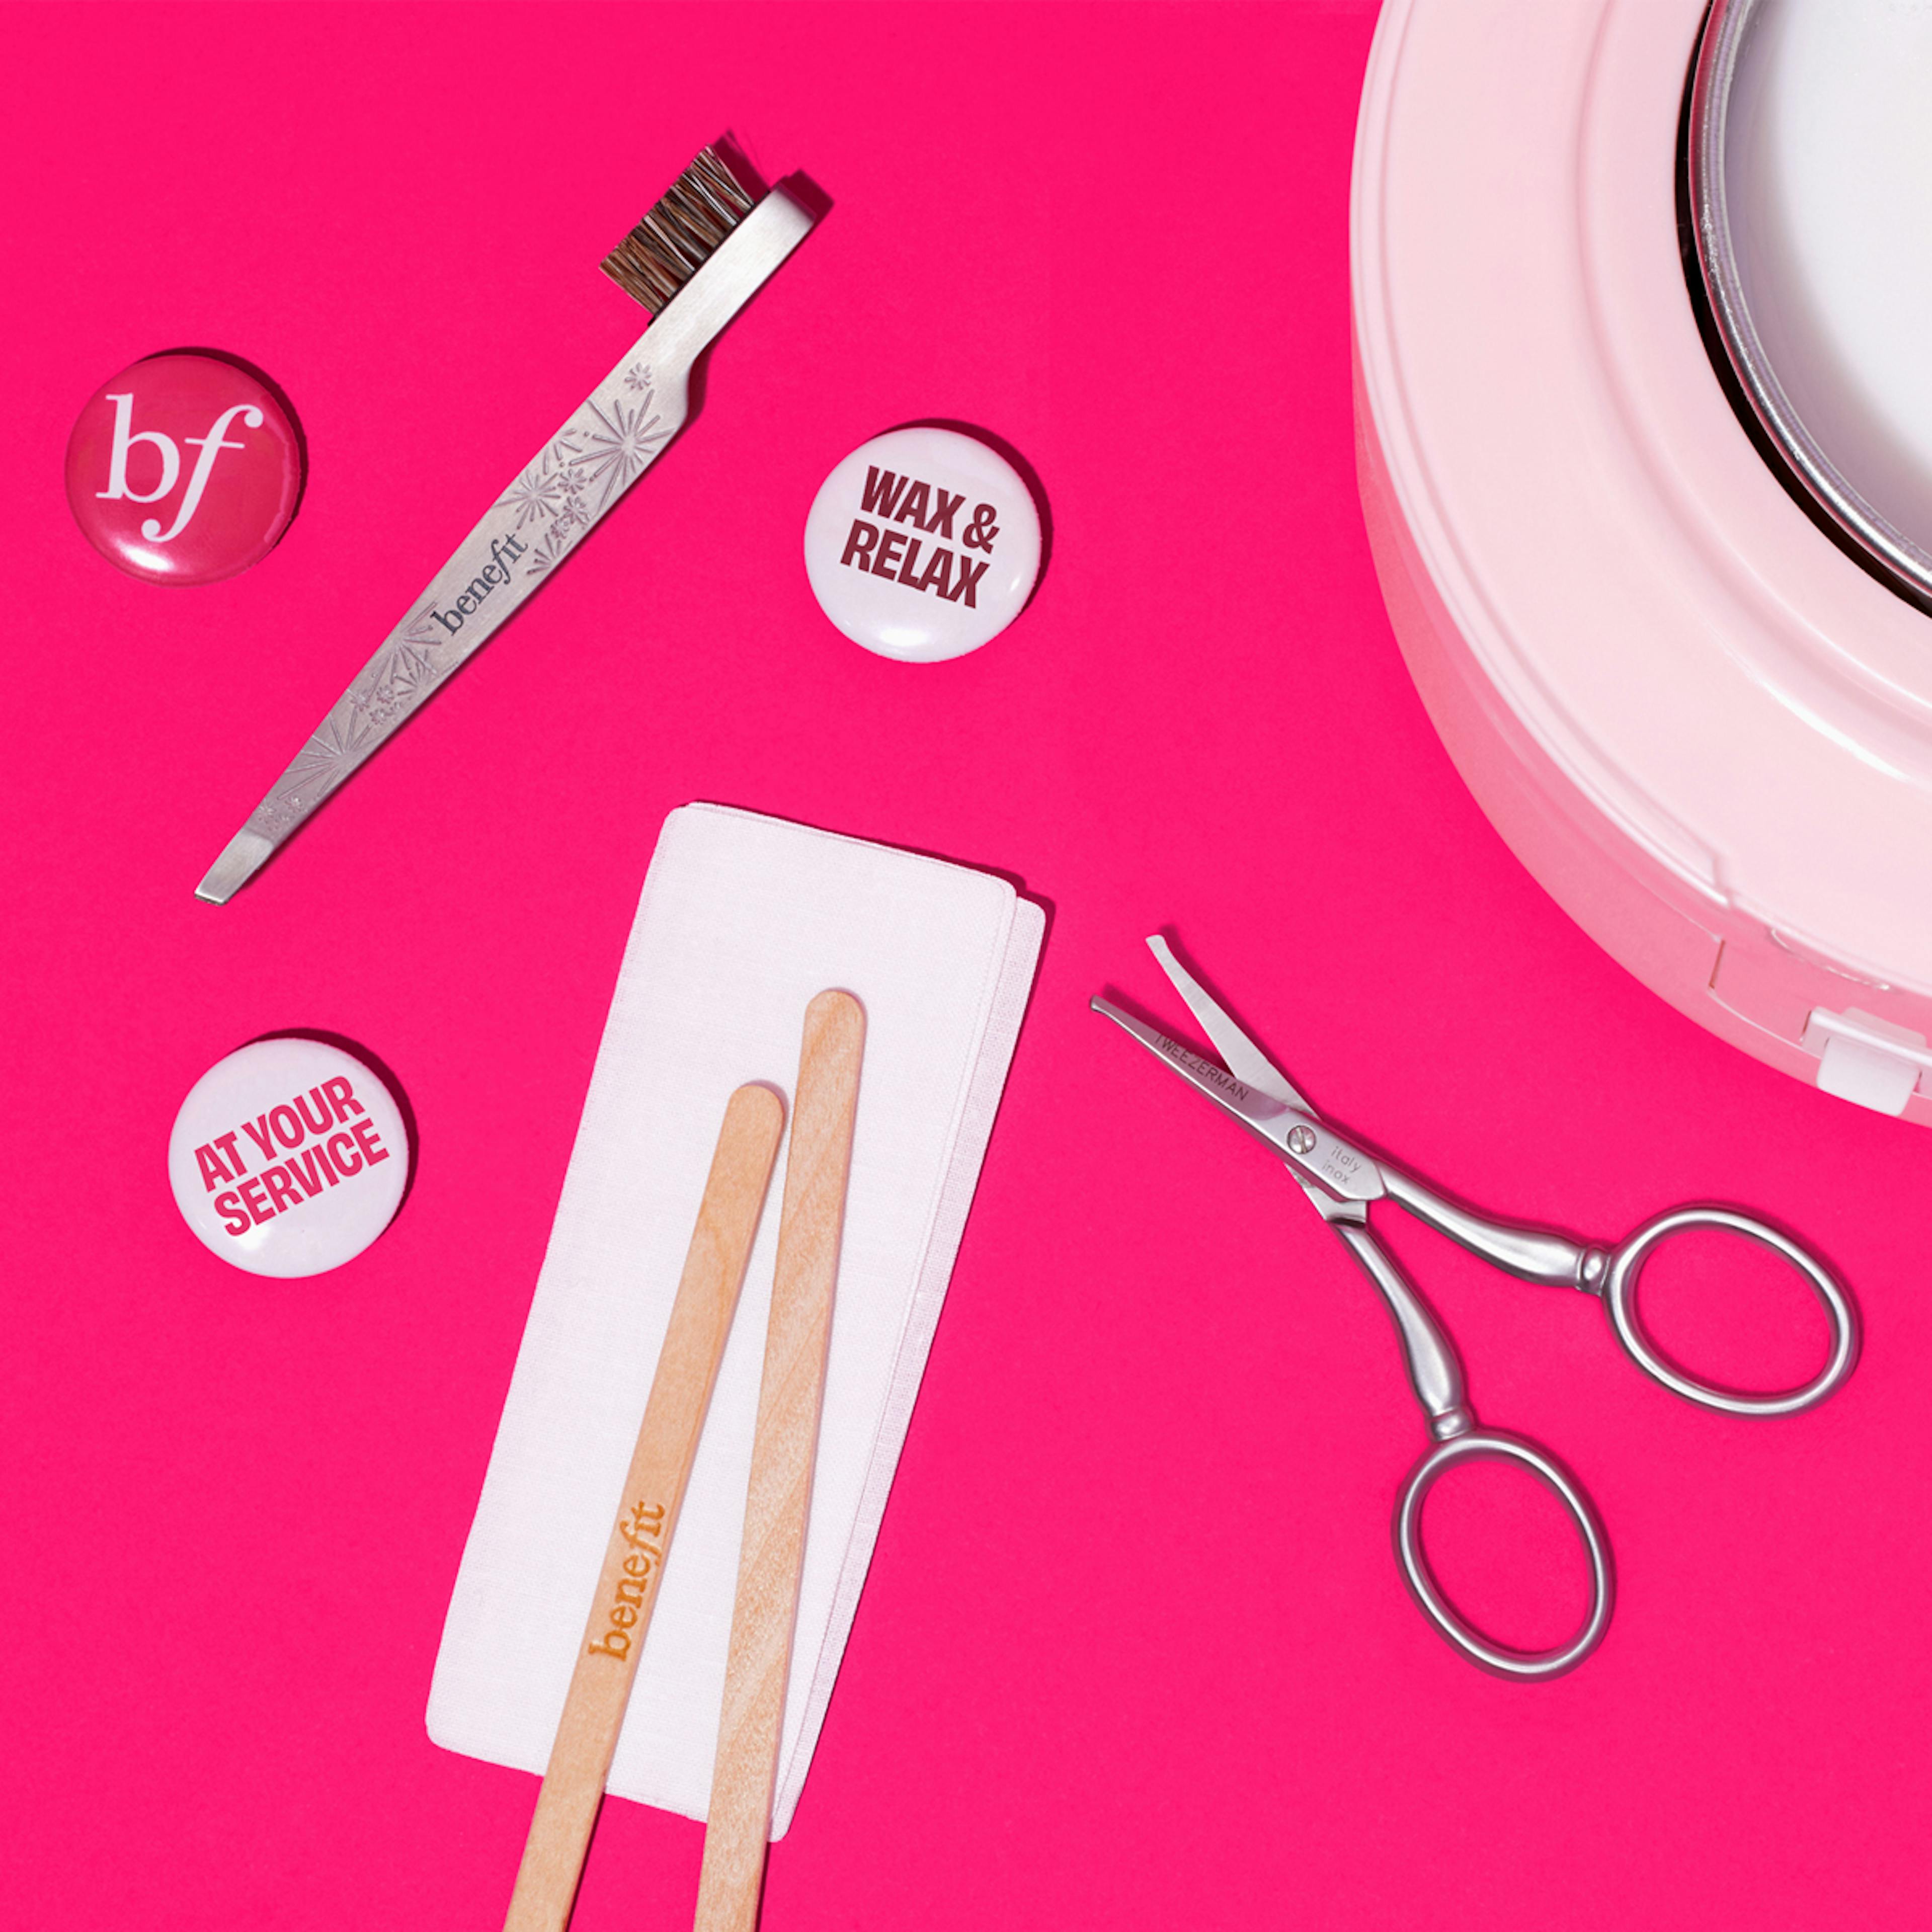 Benefit's Bold is Beautiful philanthropy program supports women & girls through brow wax proceed donations. 